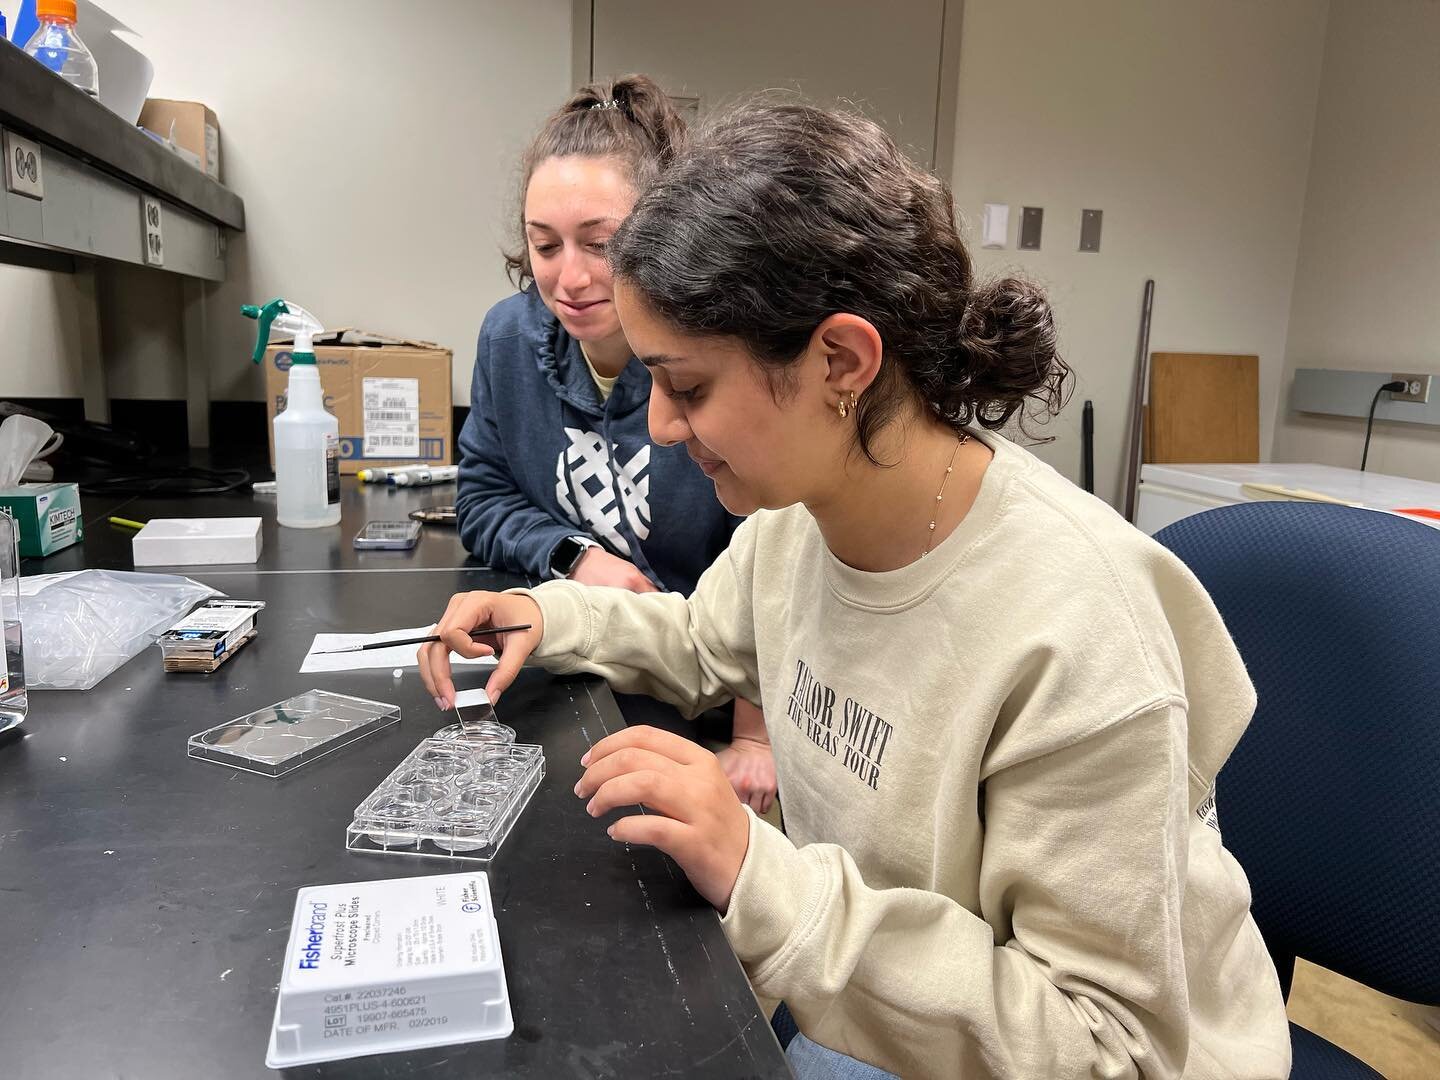 Summer research has begun! Sonya and Carly practice mounting brain slices onto slides, one of the greatest hurdles IMHO